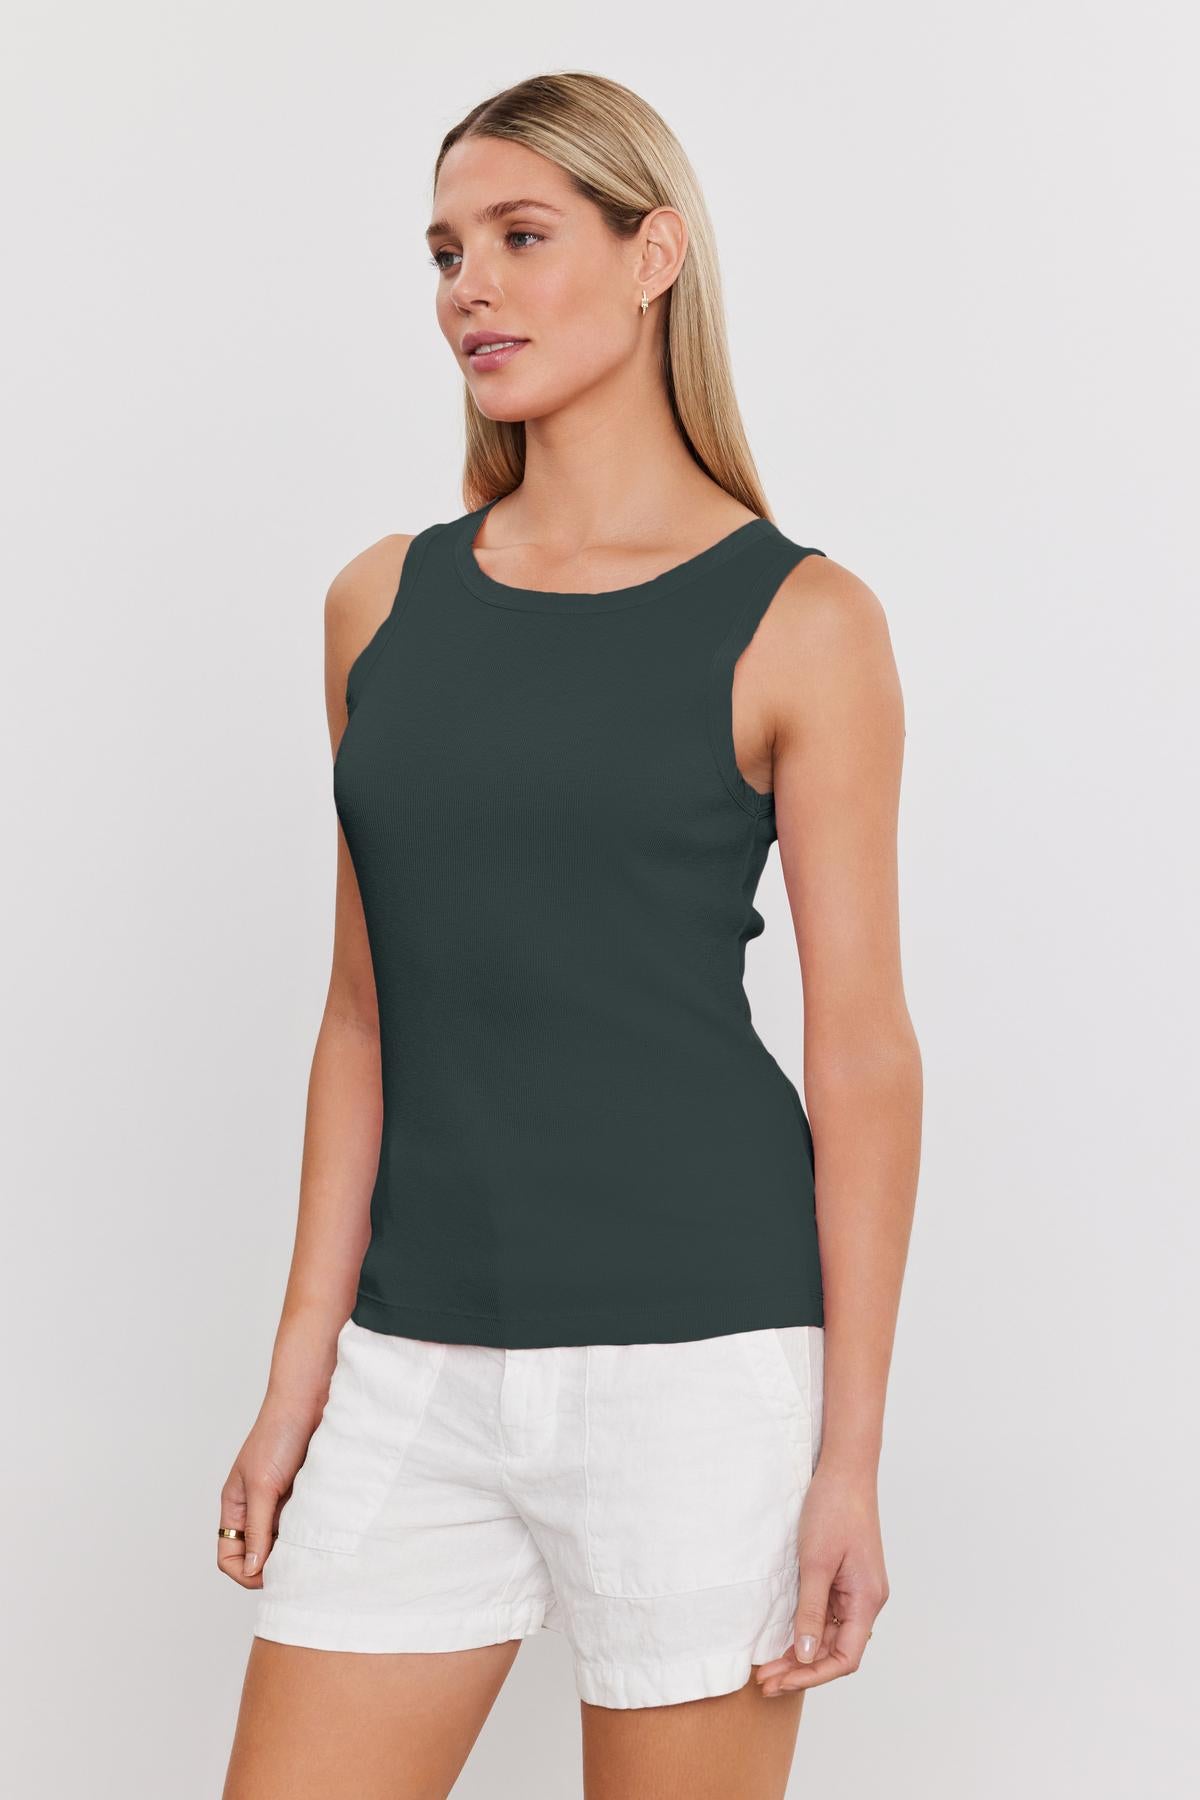 A person with long blonde hair is wearing a dark green MAXIE RIBBED TANK TOP by Velvet by Graham & Spencer and white shorts, standing sideways against a plain white background. The slub knit of the top adds a soft textured detail to their look.-37241154470081